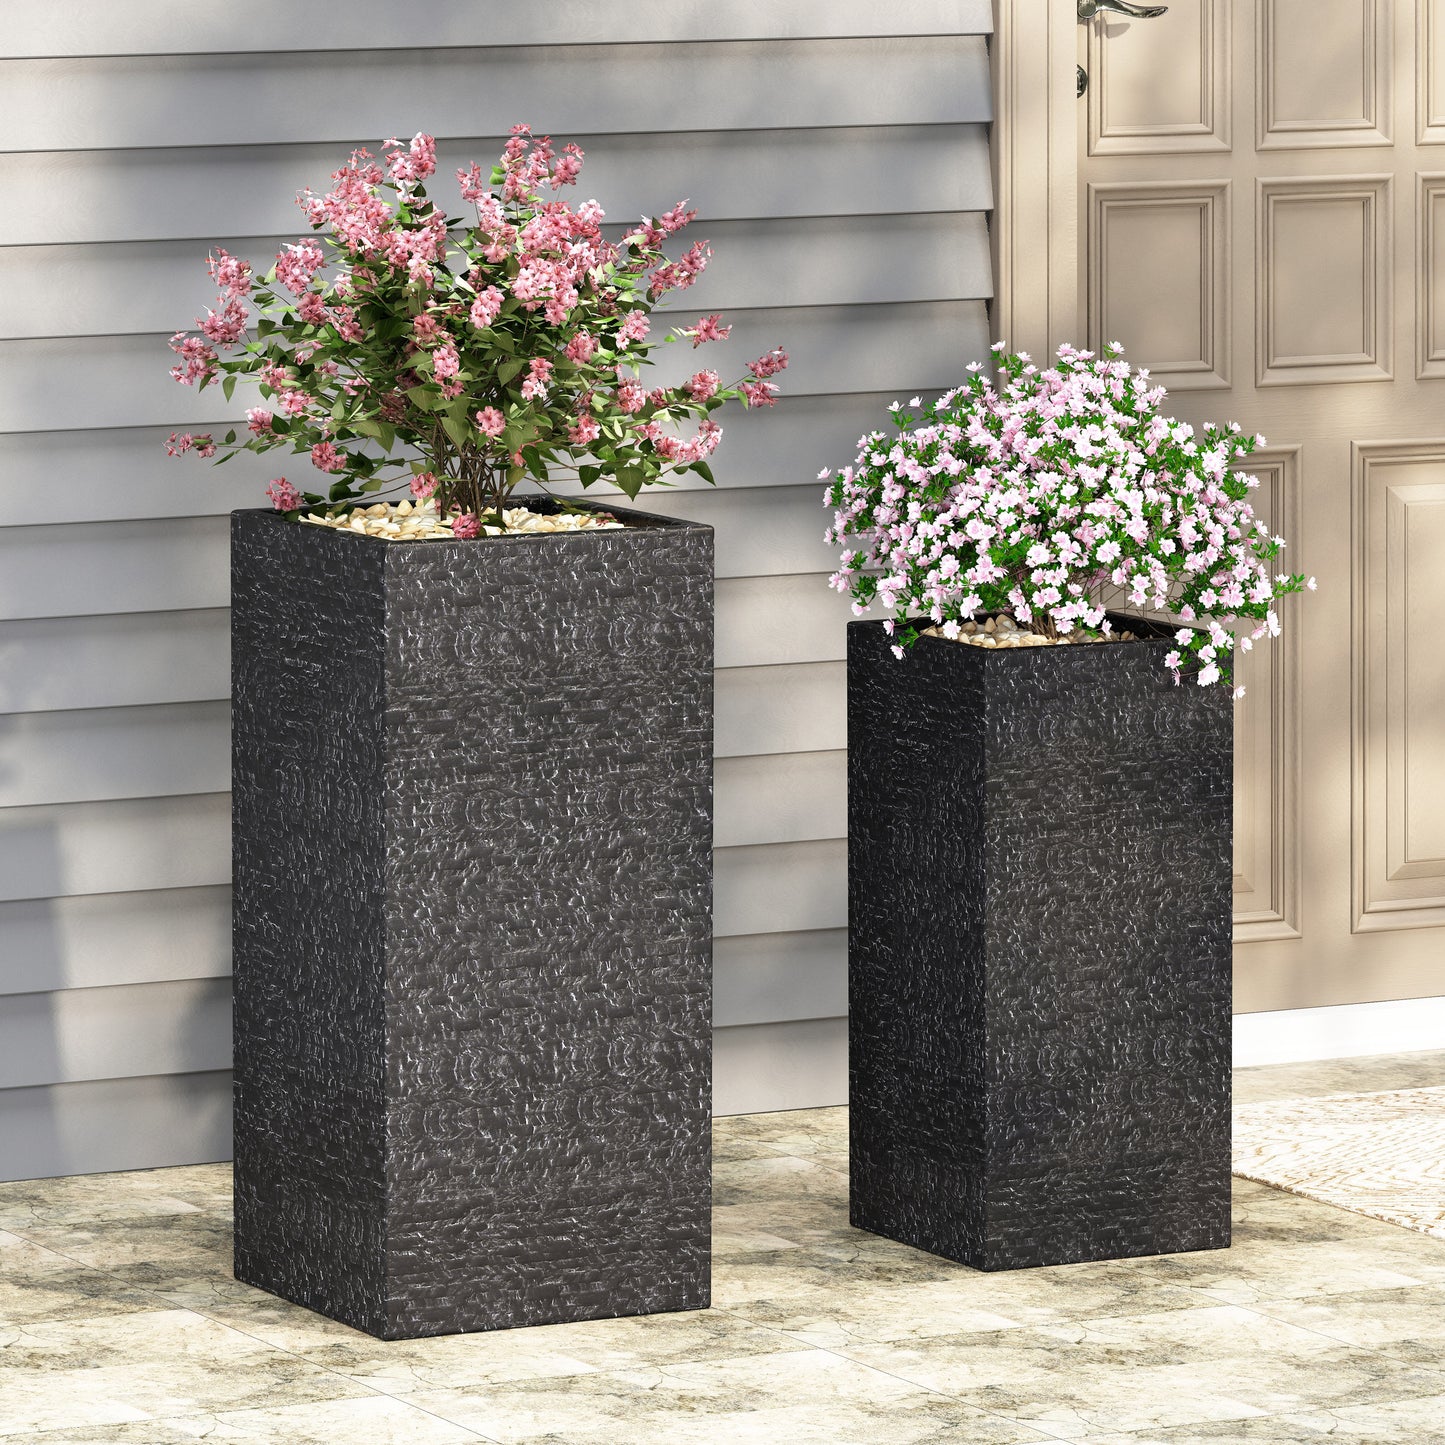 Leiman Outdoor Large and Medium Cast Stone Planters, Set of 2, Gray